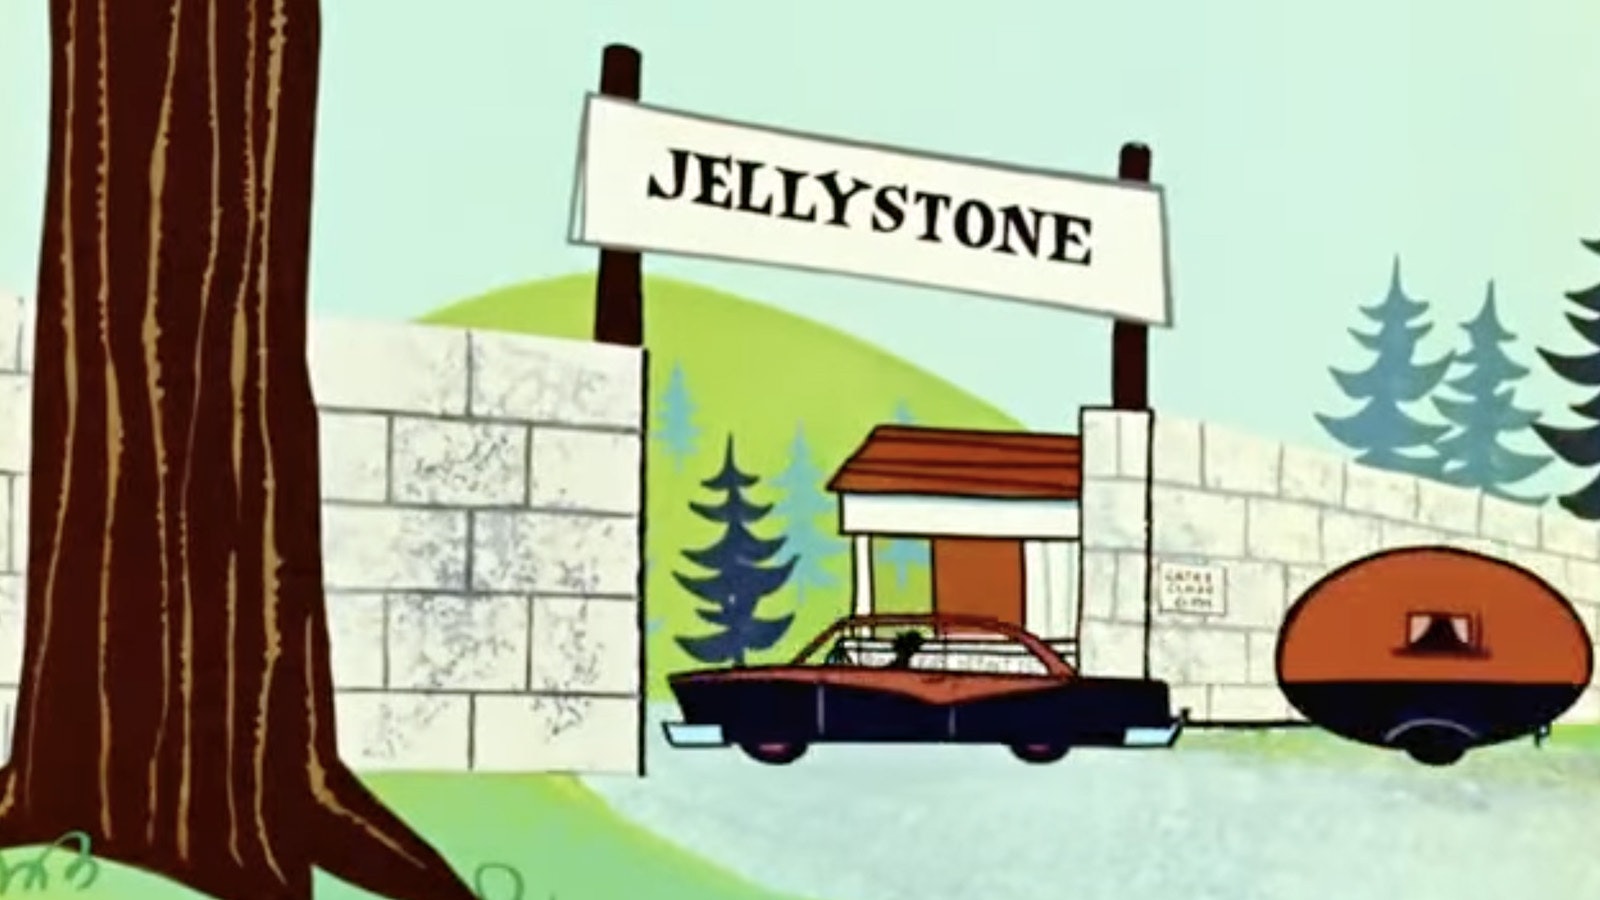 The entrance to Jellystone National Park as it appears Hanna-Barbera's 1958 cartoon "Yogi Bear's Big Break." This episode was the first appearance of Yogi, Boo-Boo and Jellystone.